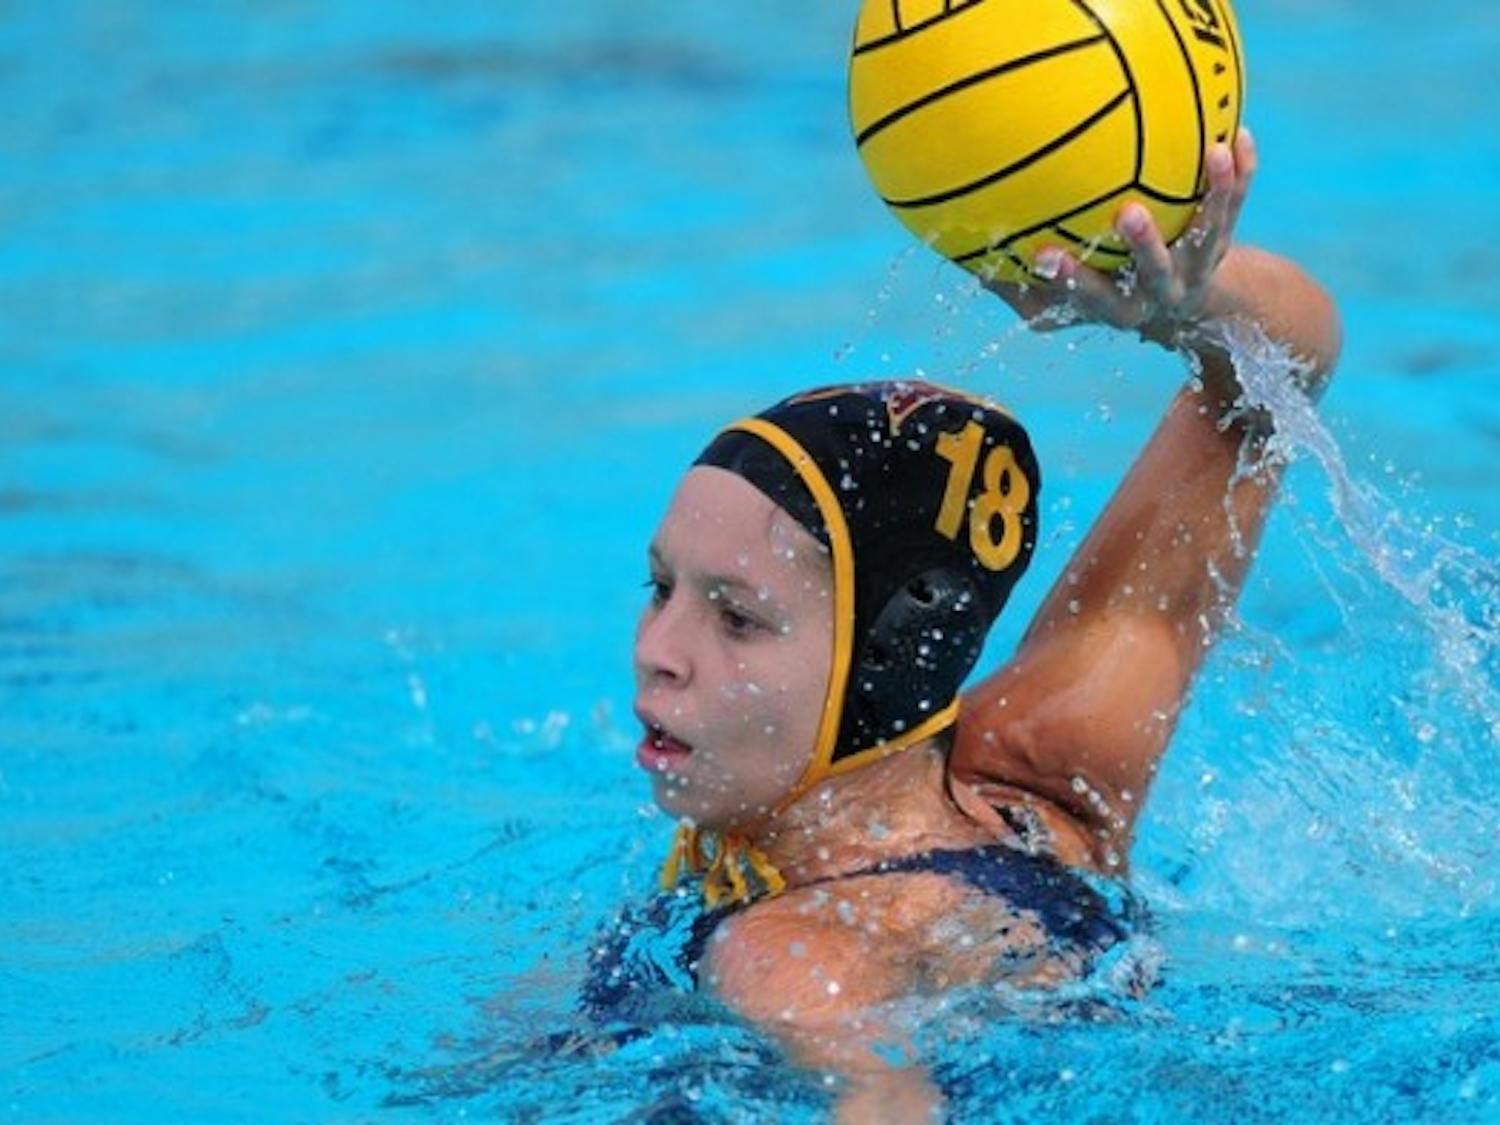 Then-freshman Izabella Chiappini is pictured in an ASU water polo game in 2014 (Photo courtesy of ASU)